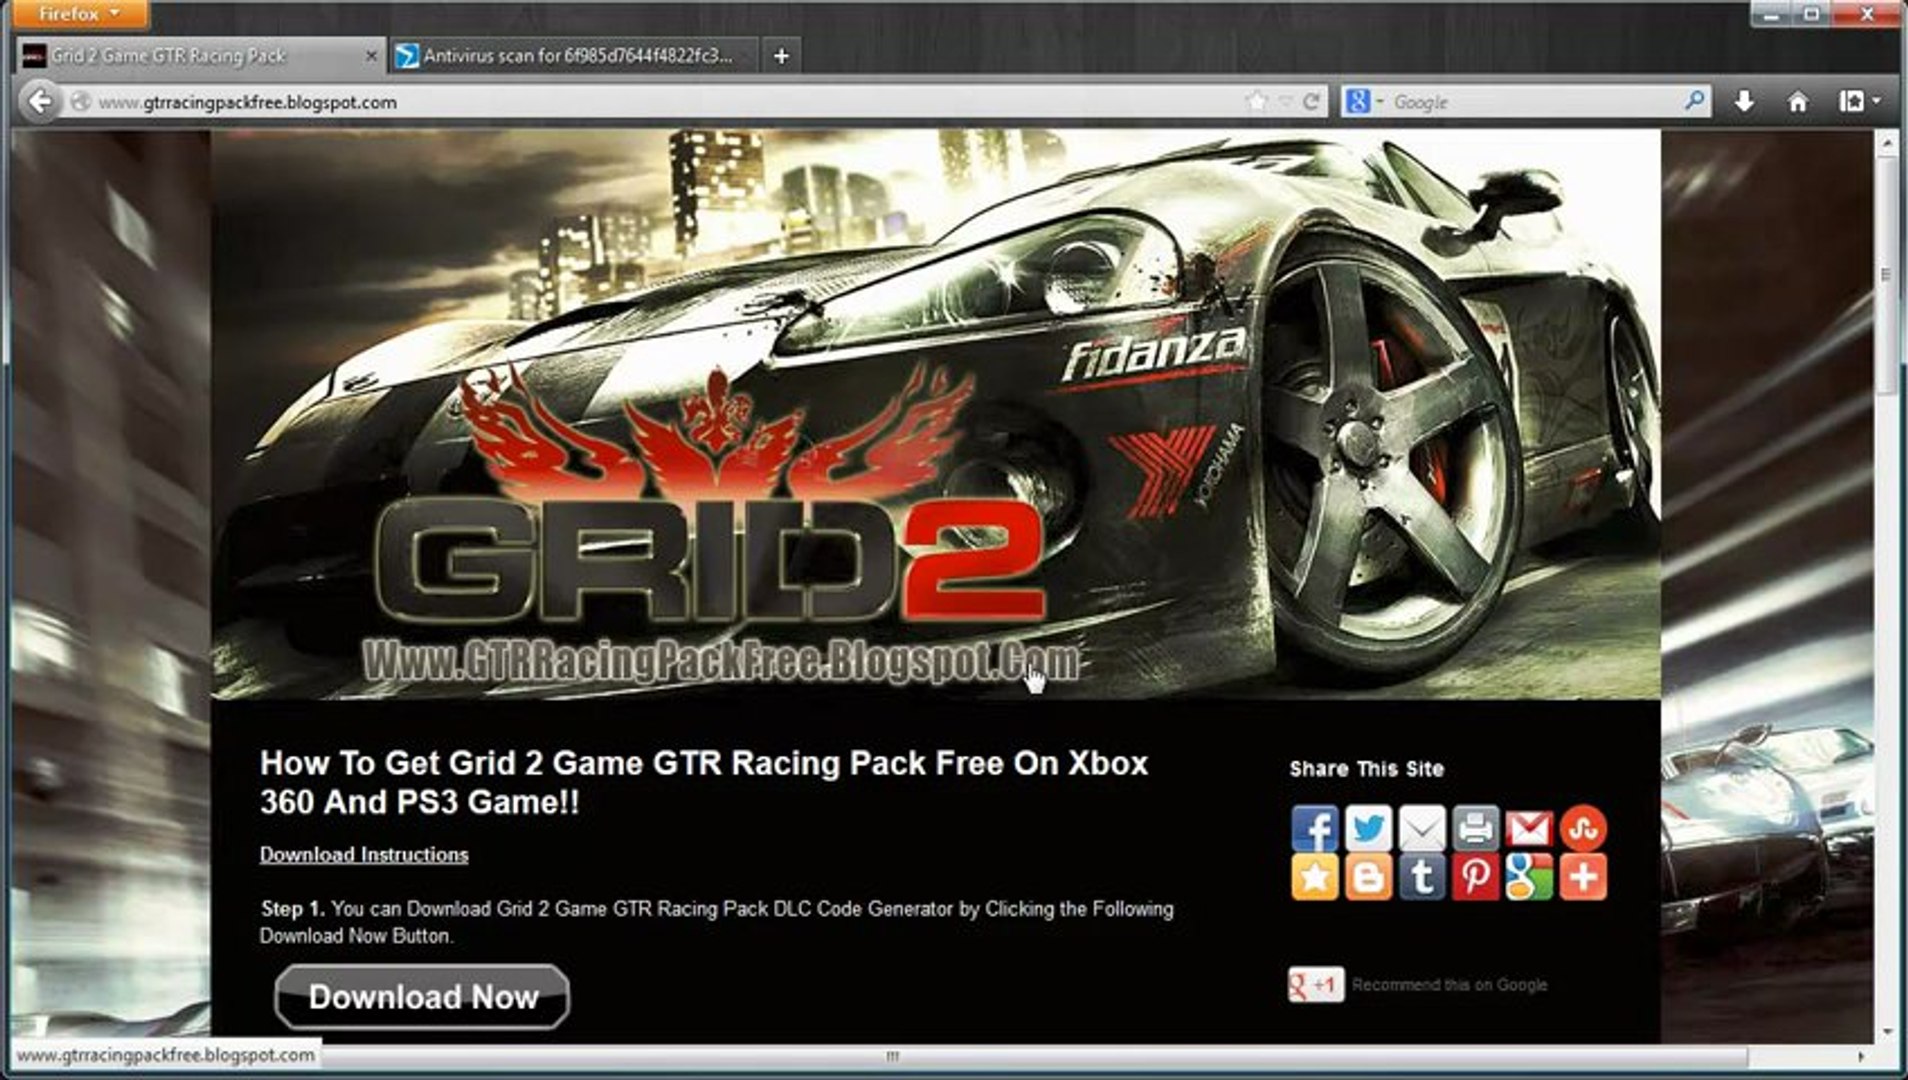 How to Get Grid 2 GTR Racing Pack DLC Free!! - video Dailymotion